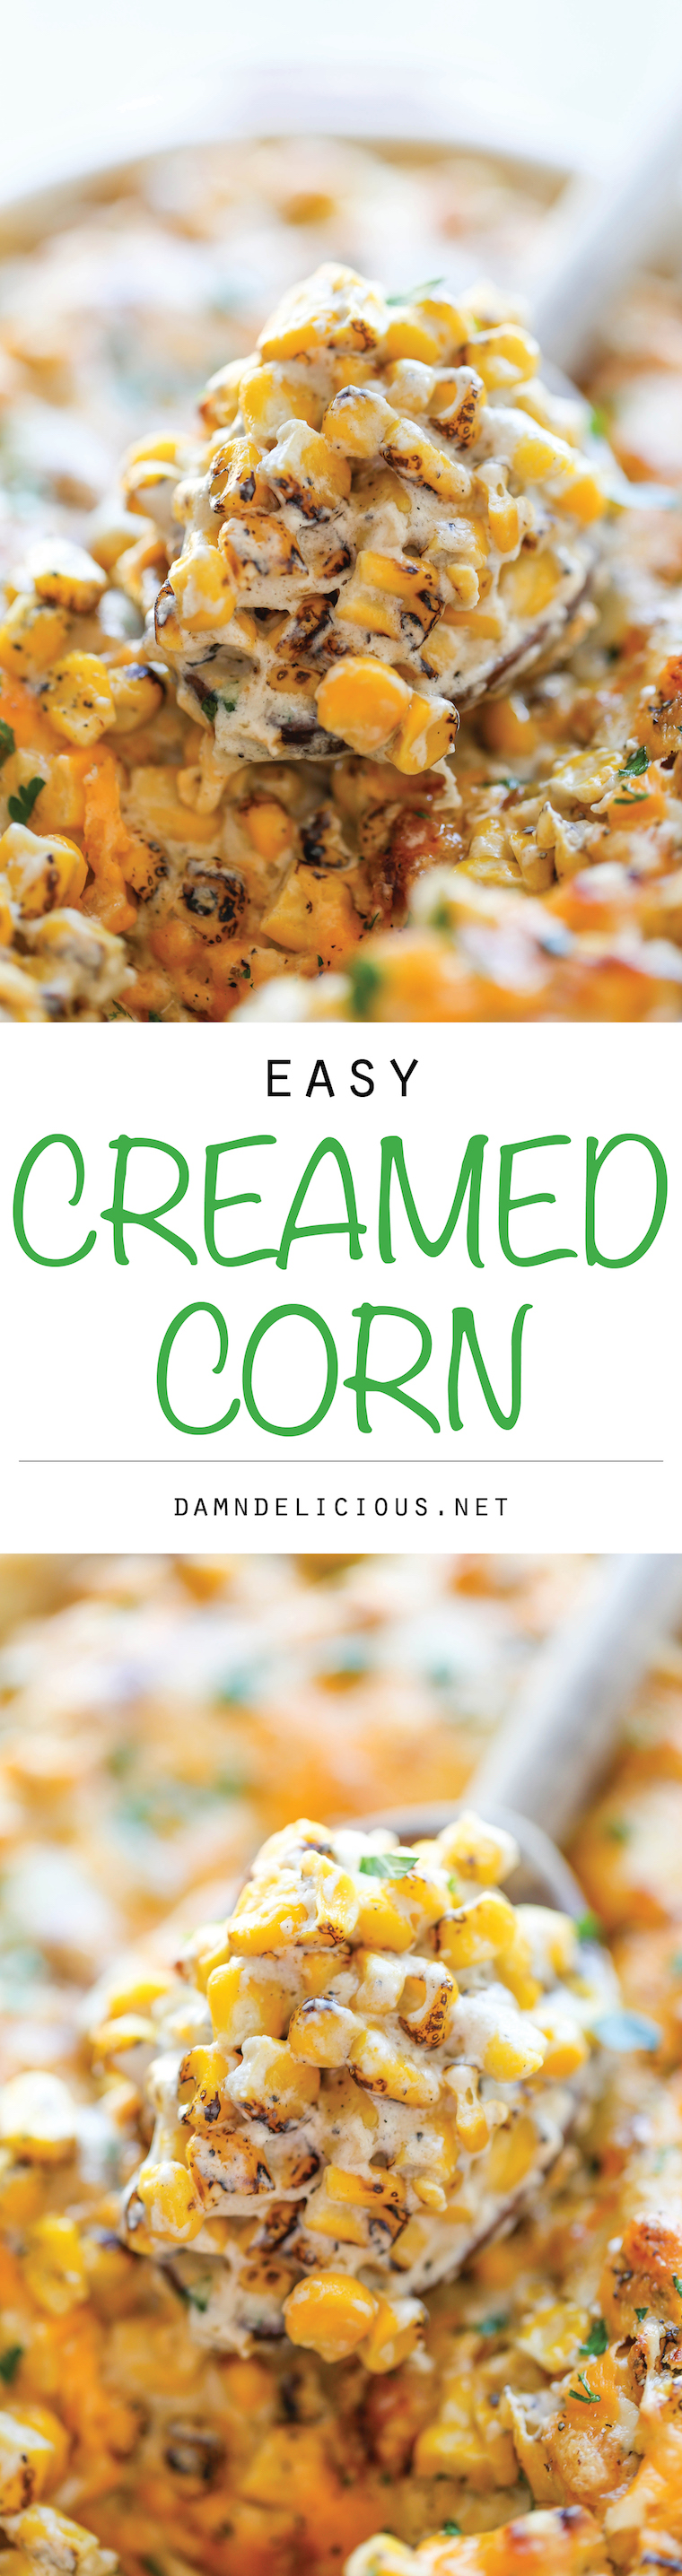 Easy Creamed Corn - The creamiest, most amazing creamed corn you will ever have – and it’s so easy to make, it’s practically fool-proof!